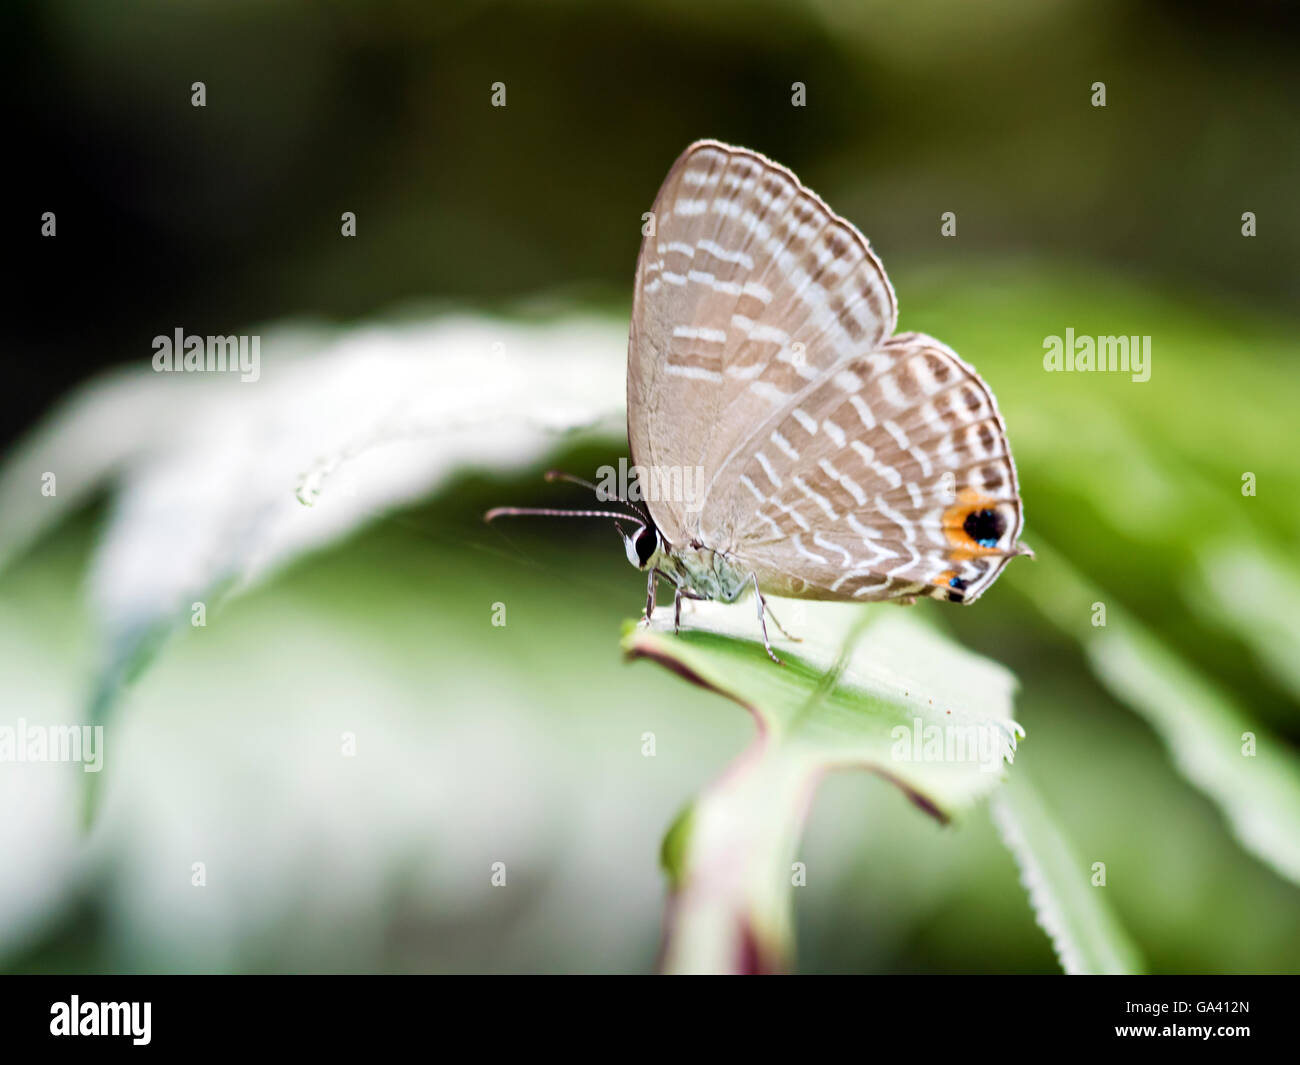 Brush-footed butterfly appollaiarsi su foglie,Prosotas nora formosana Foto Stock